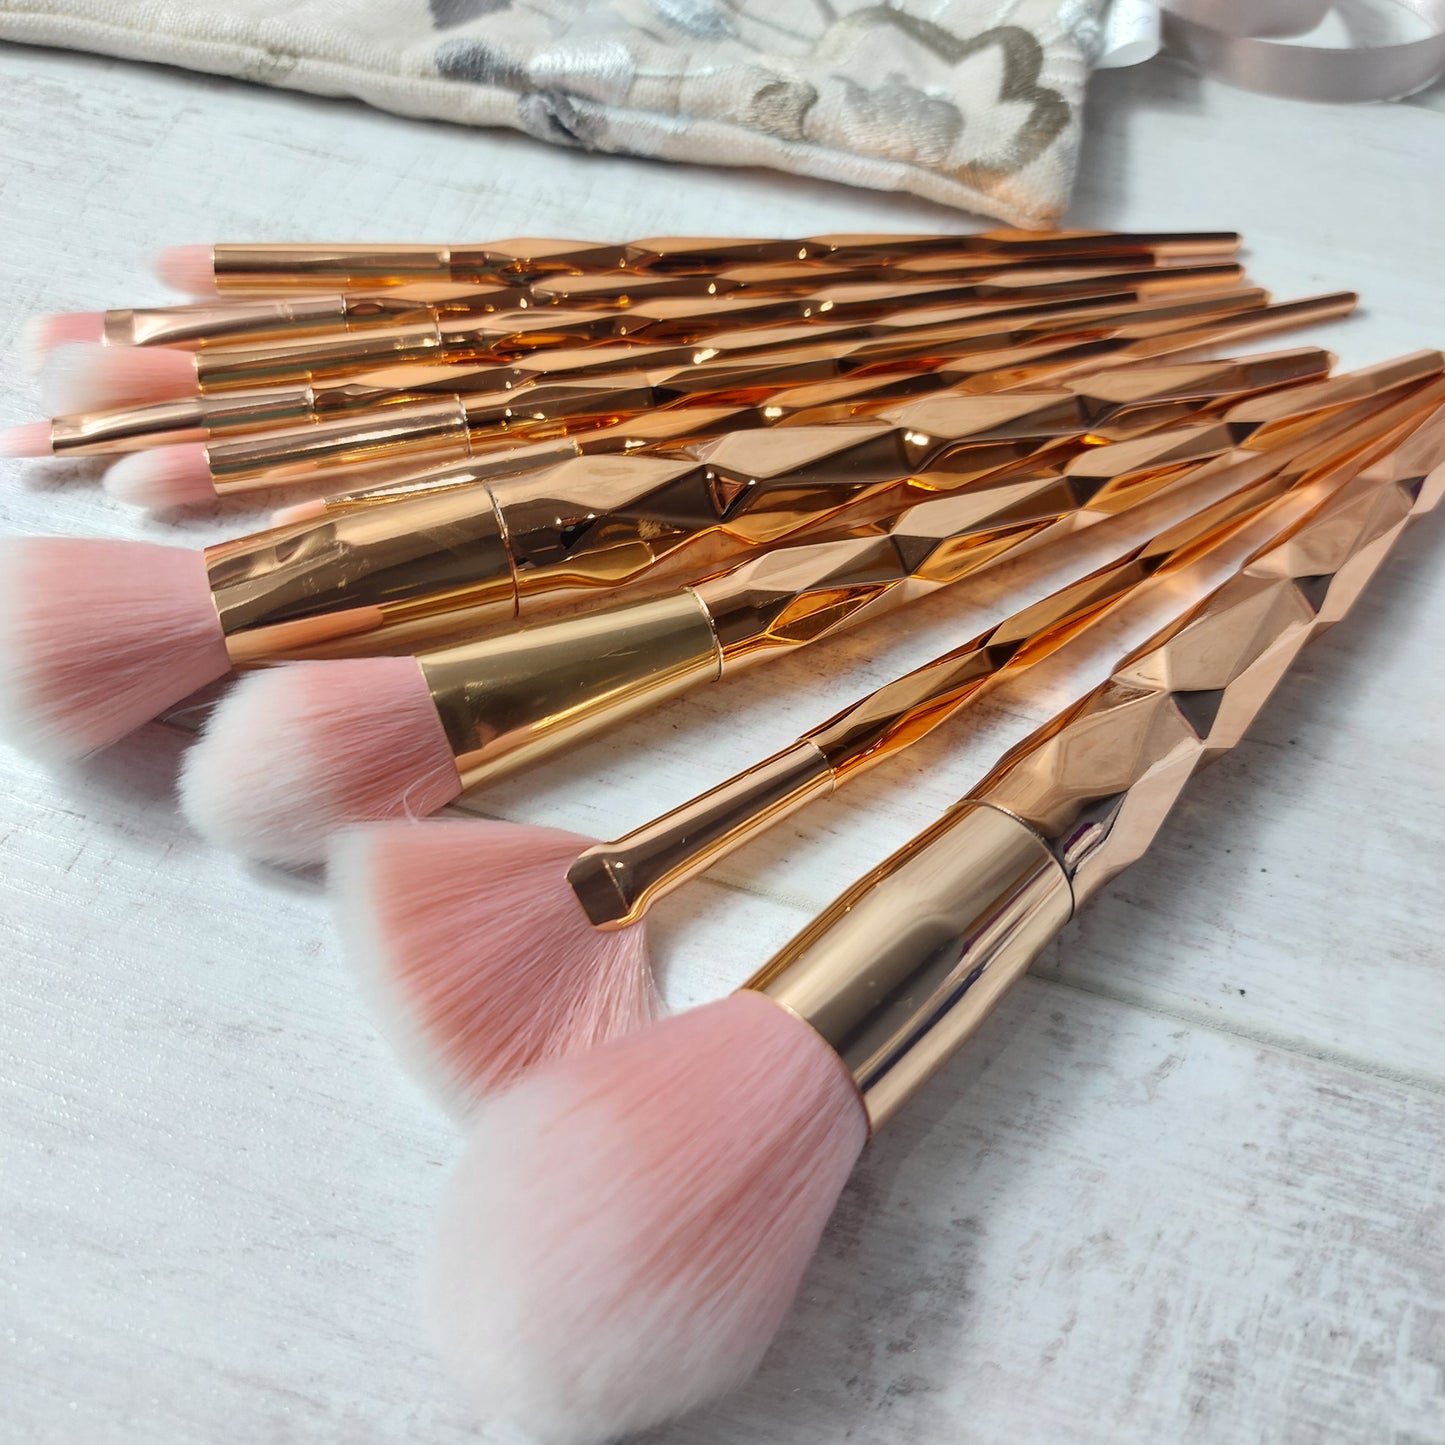 10 Make Up Brushes in a Handmade Case